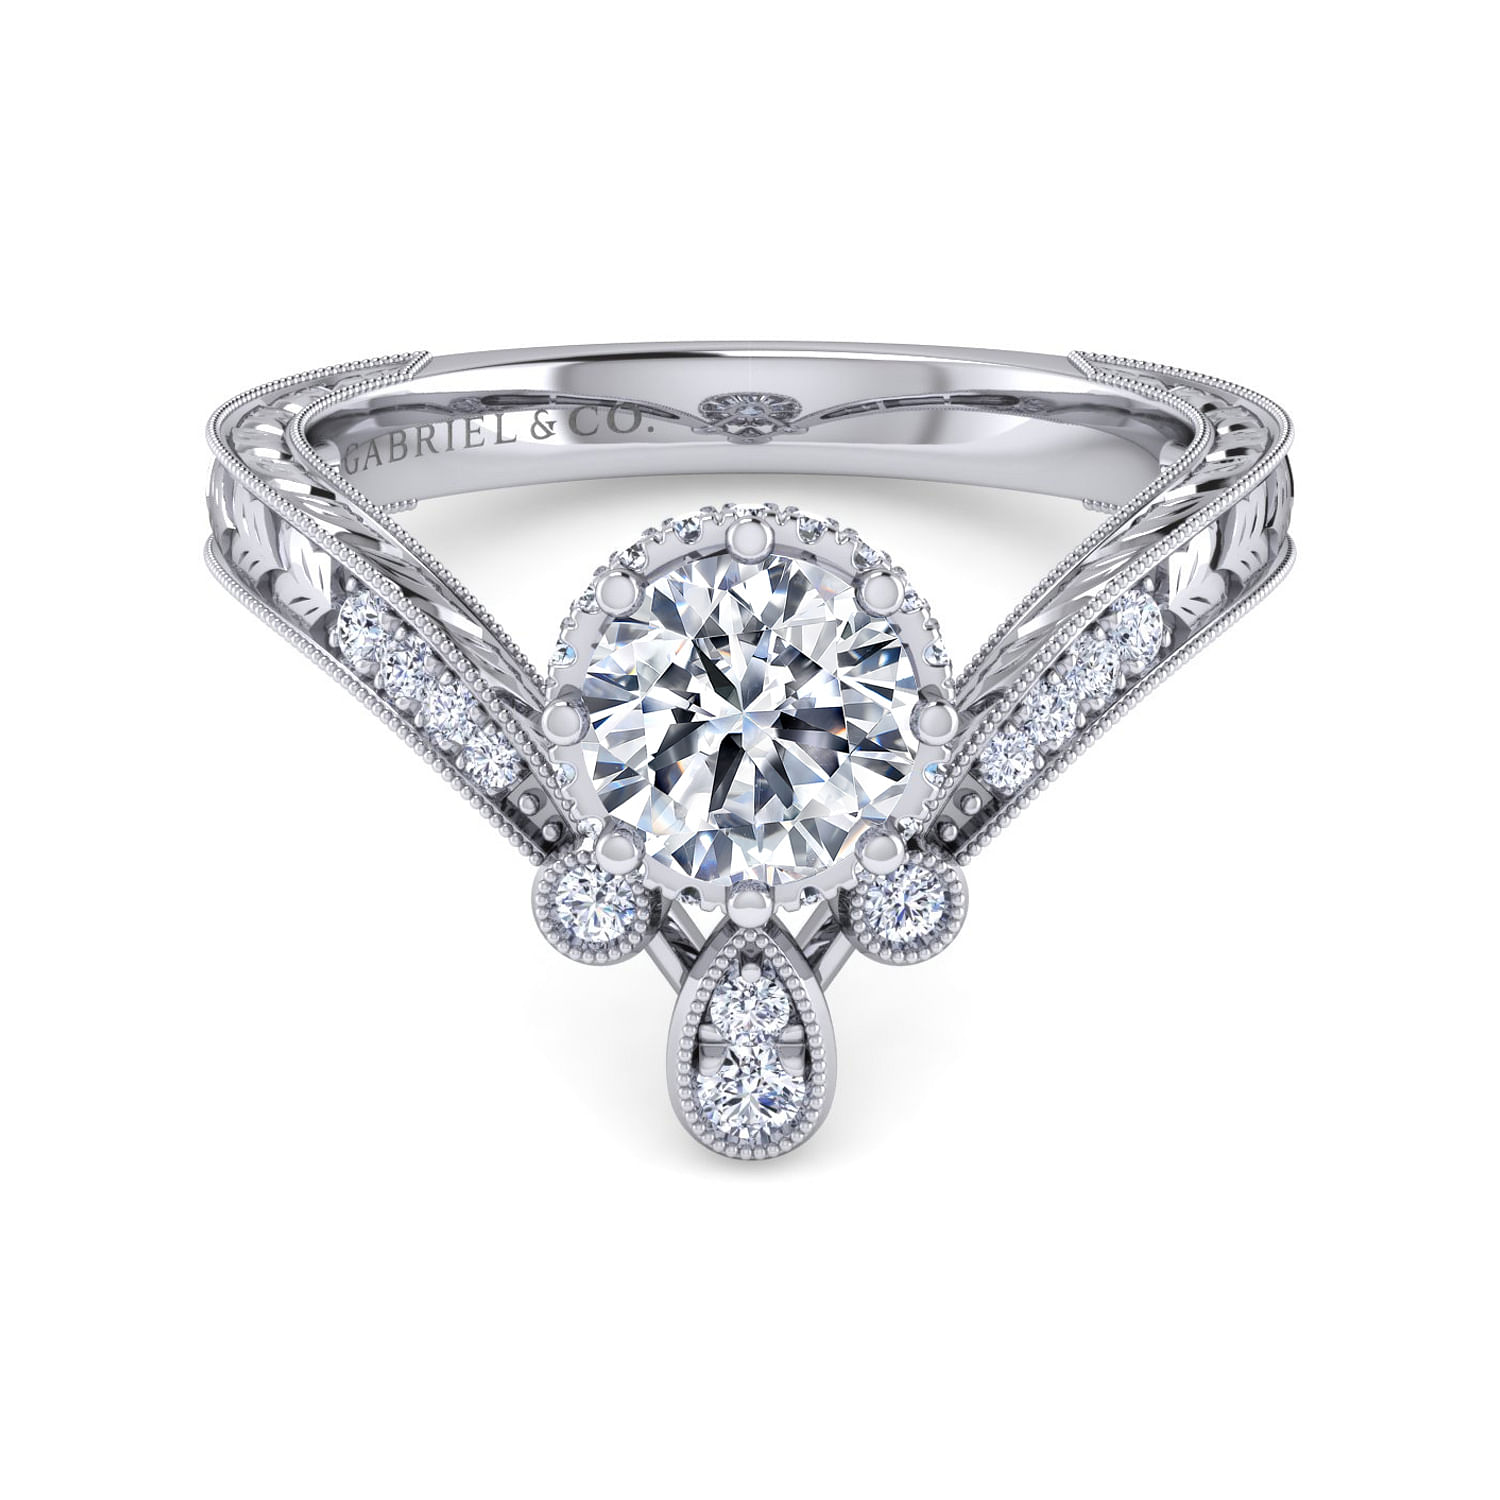 Oriana - Vintage Inspired 14K White Gold Curved Round Diamond Engagement Ring